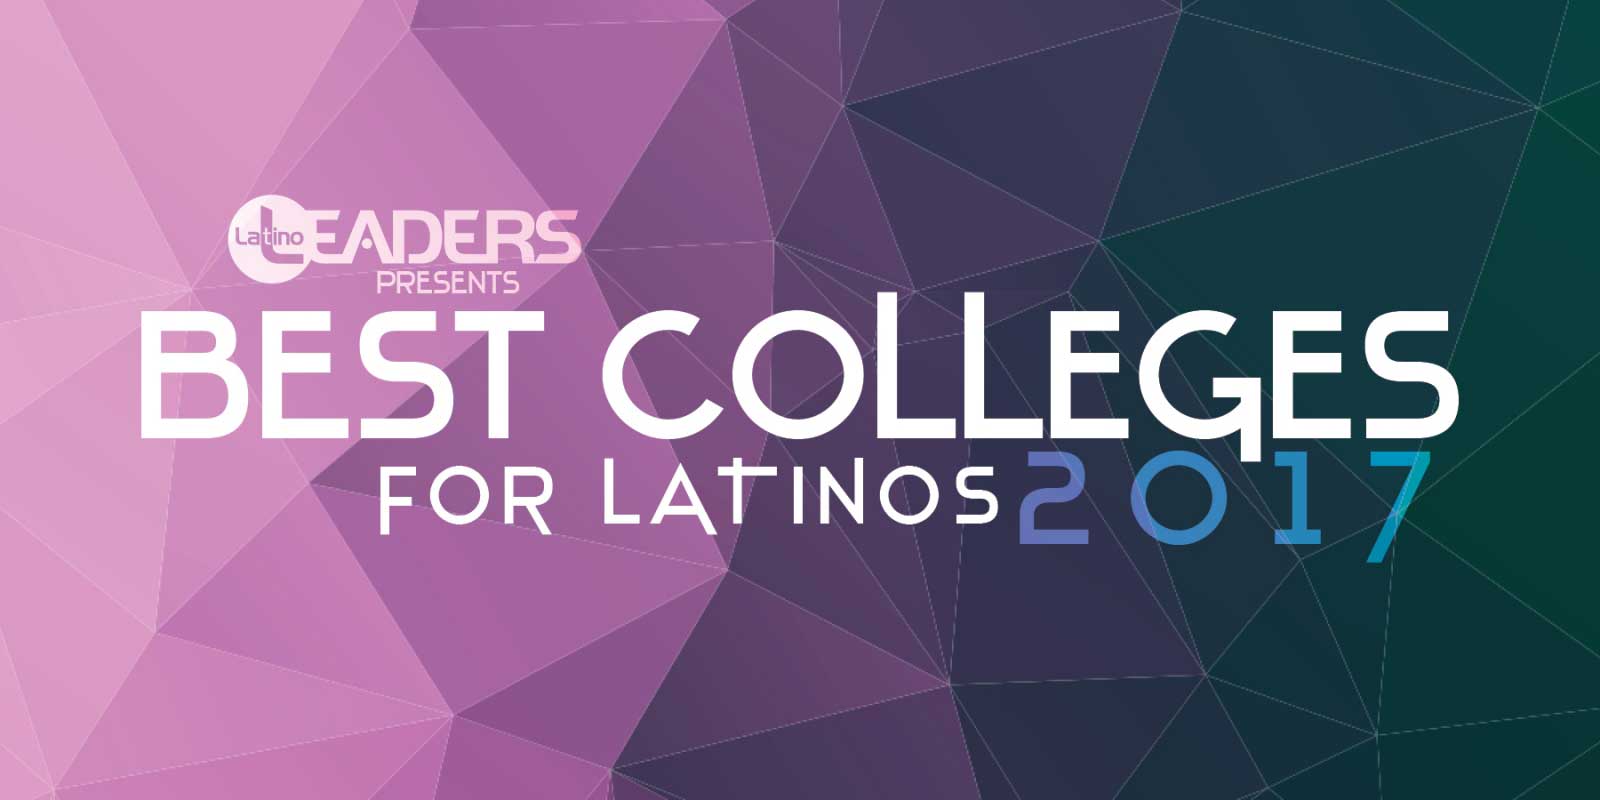 Leaders Presents Best Colleges for Latinos 2017